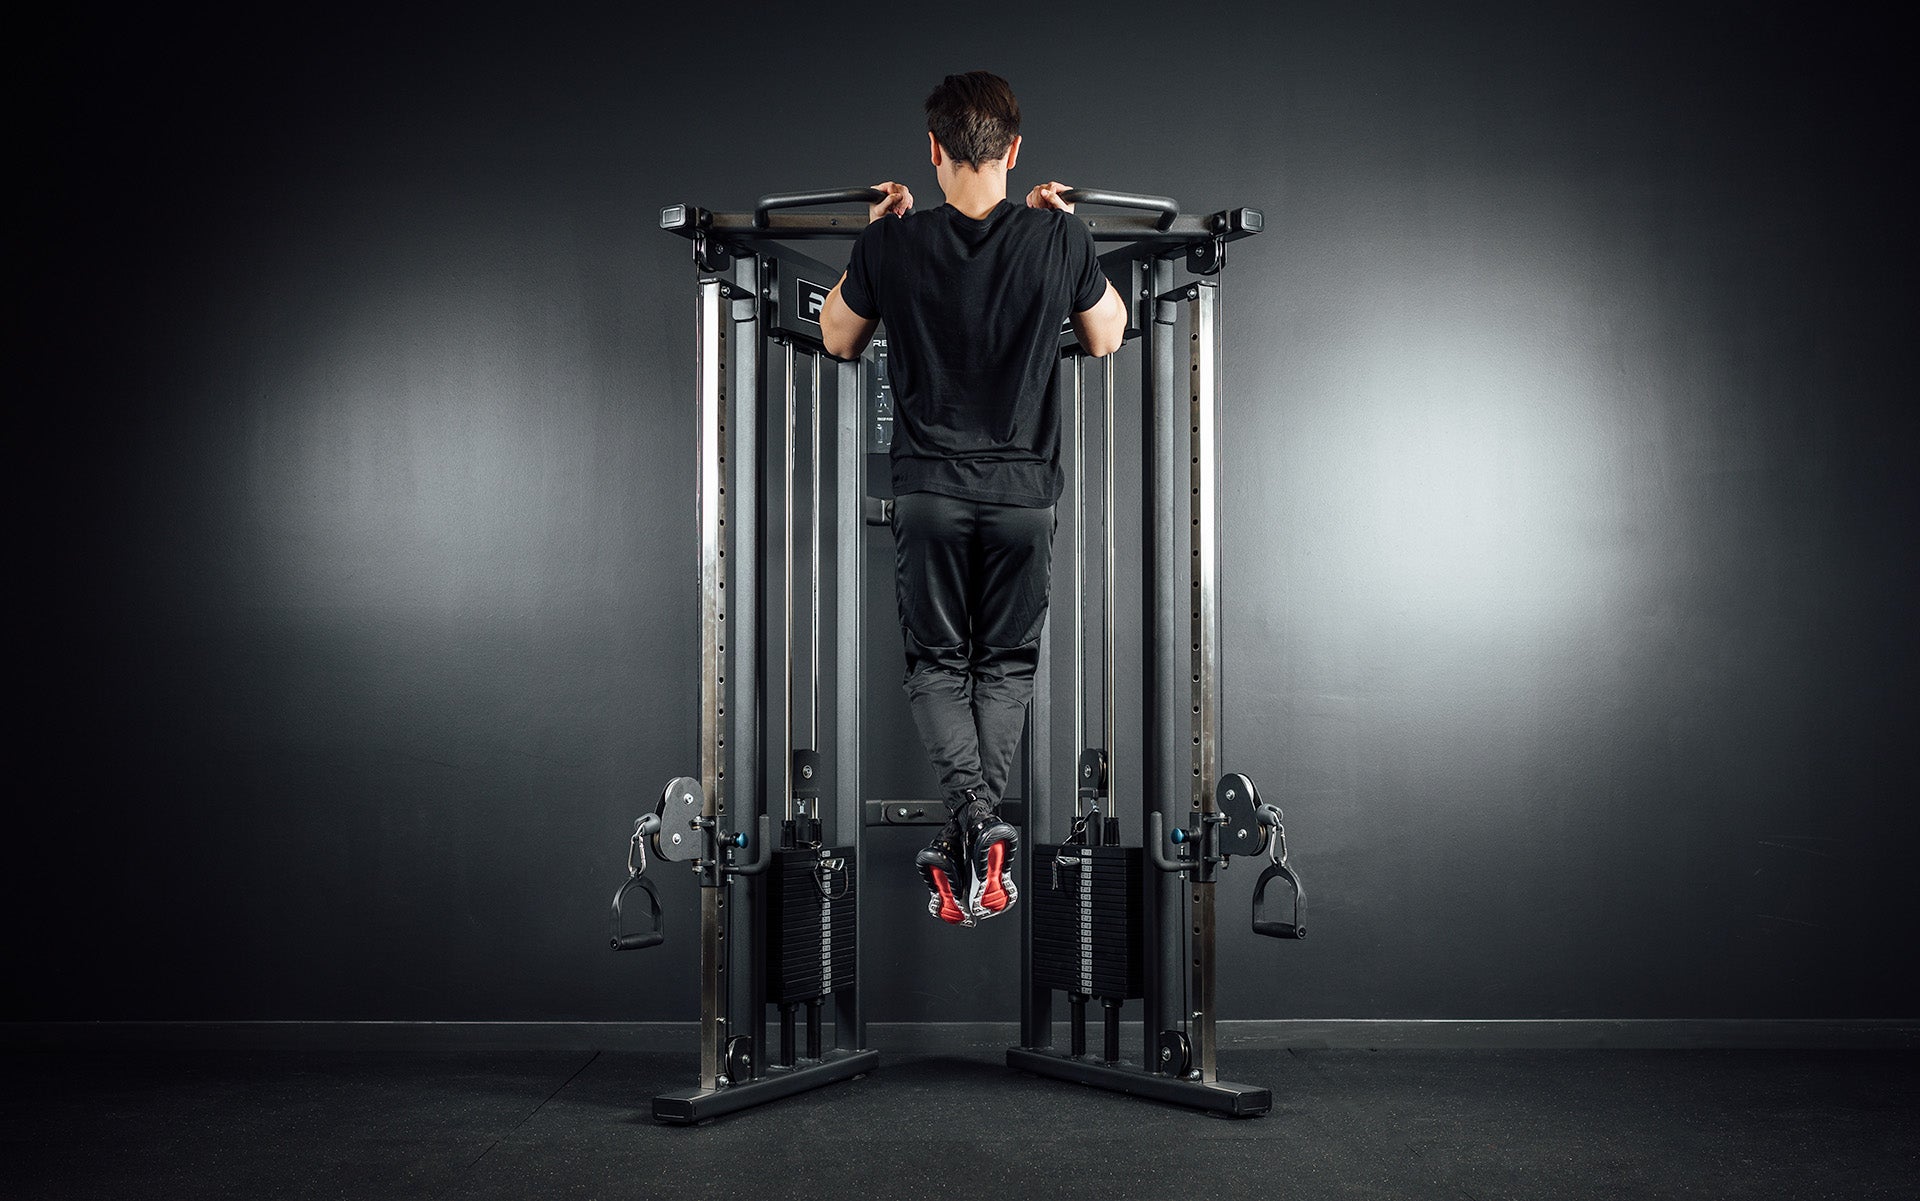 FT-3000 Compact Functional Trainer 2.0 Being Used For Pull-Ups